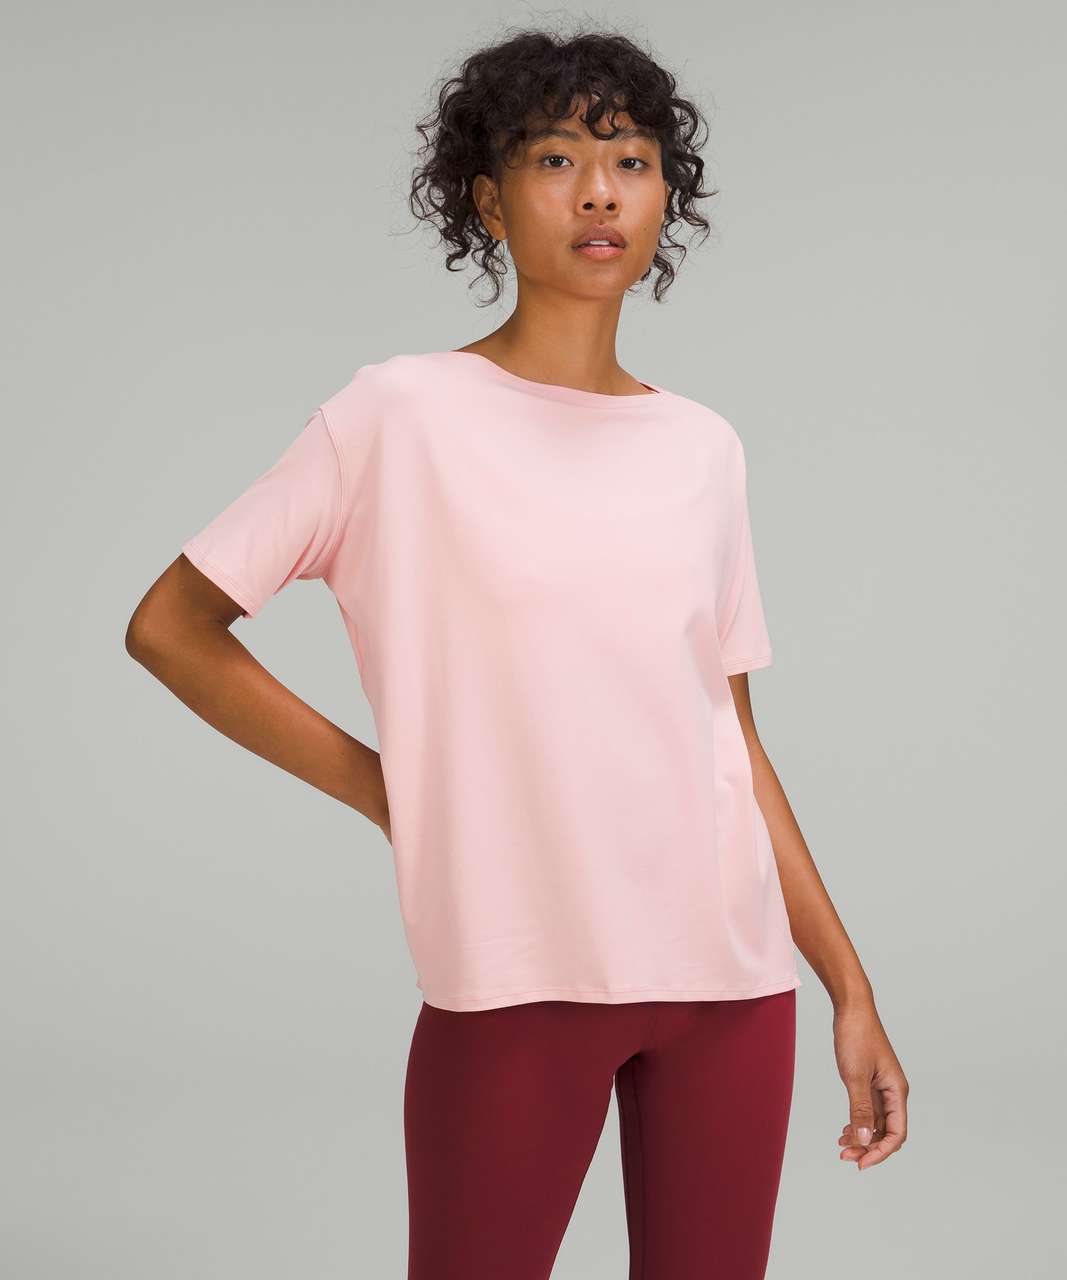 NWT Lululemon Back in Action Short Sleeve T-Shirt Nulu PINK PUFF Size :6